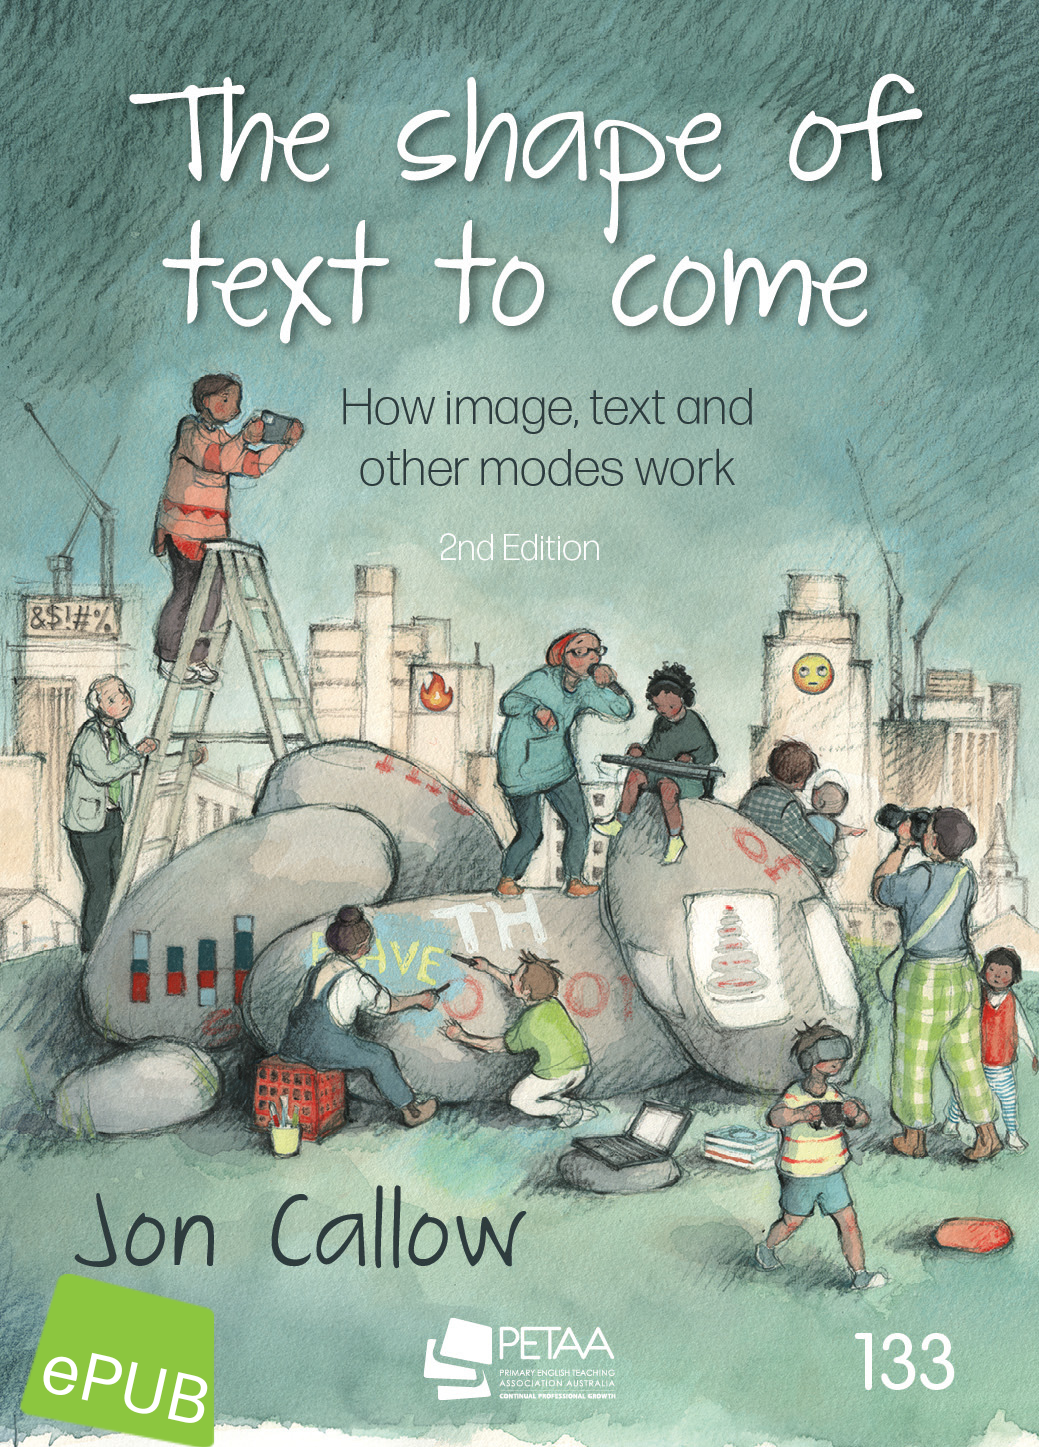 eBook - The shape of text to come 2nd edition